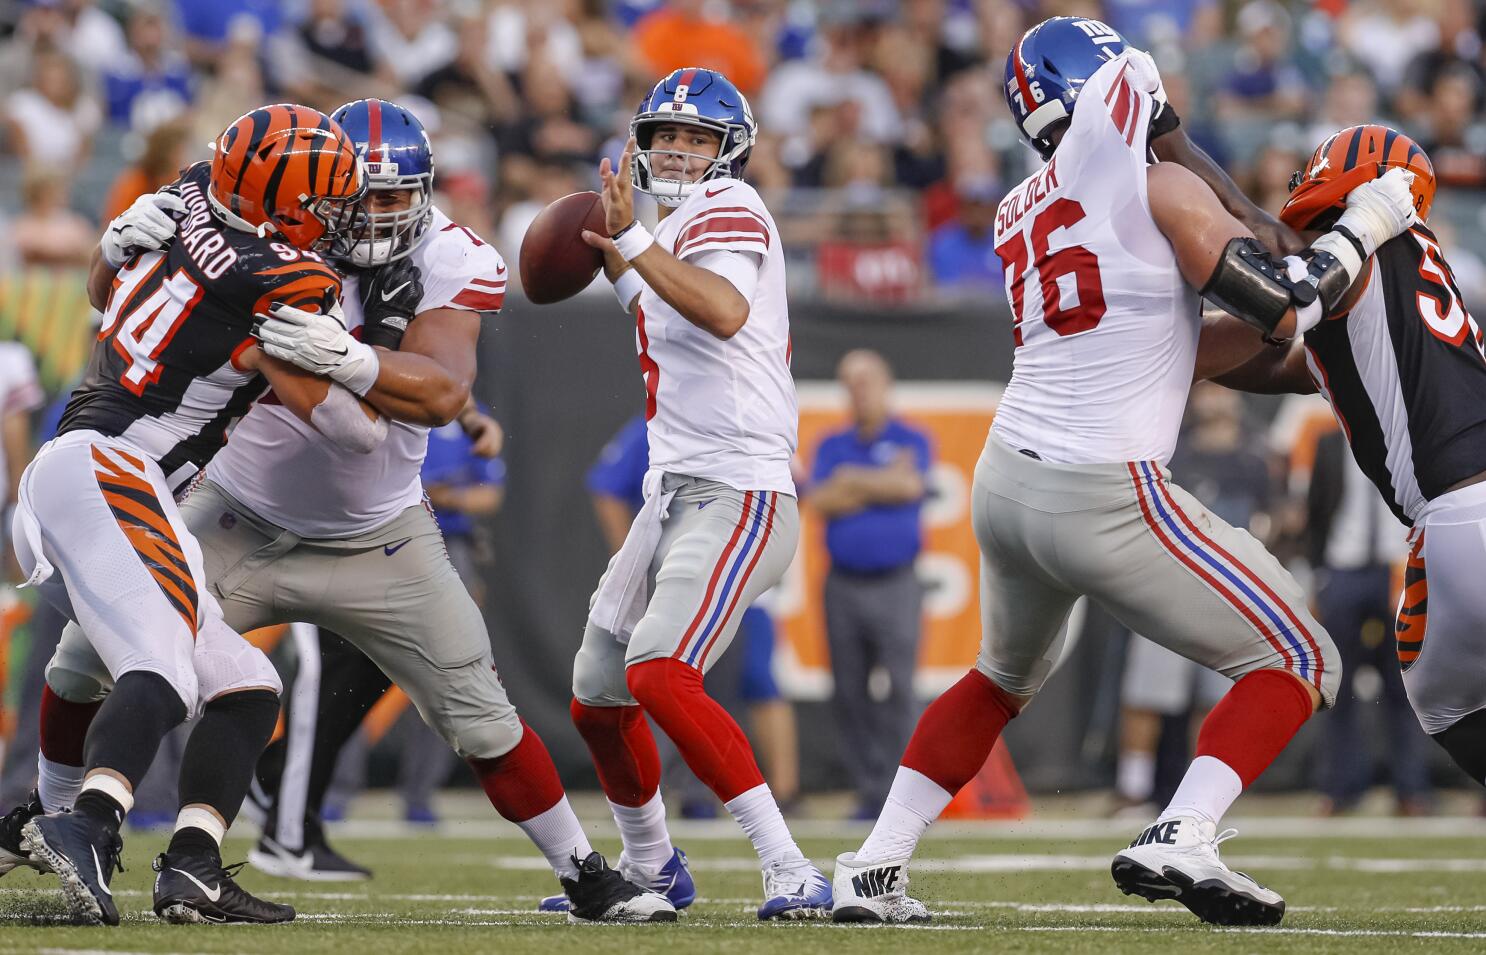 End of an Era? New York Giants Look Like One of NFL's Worst Teams